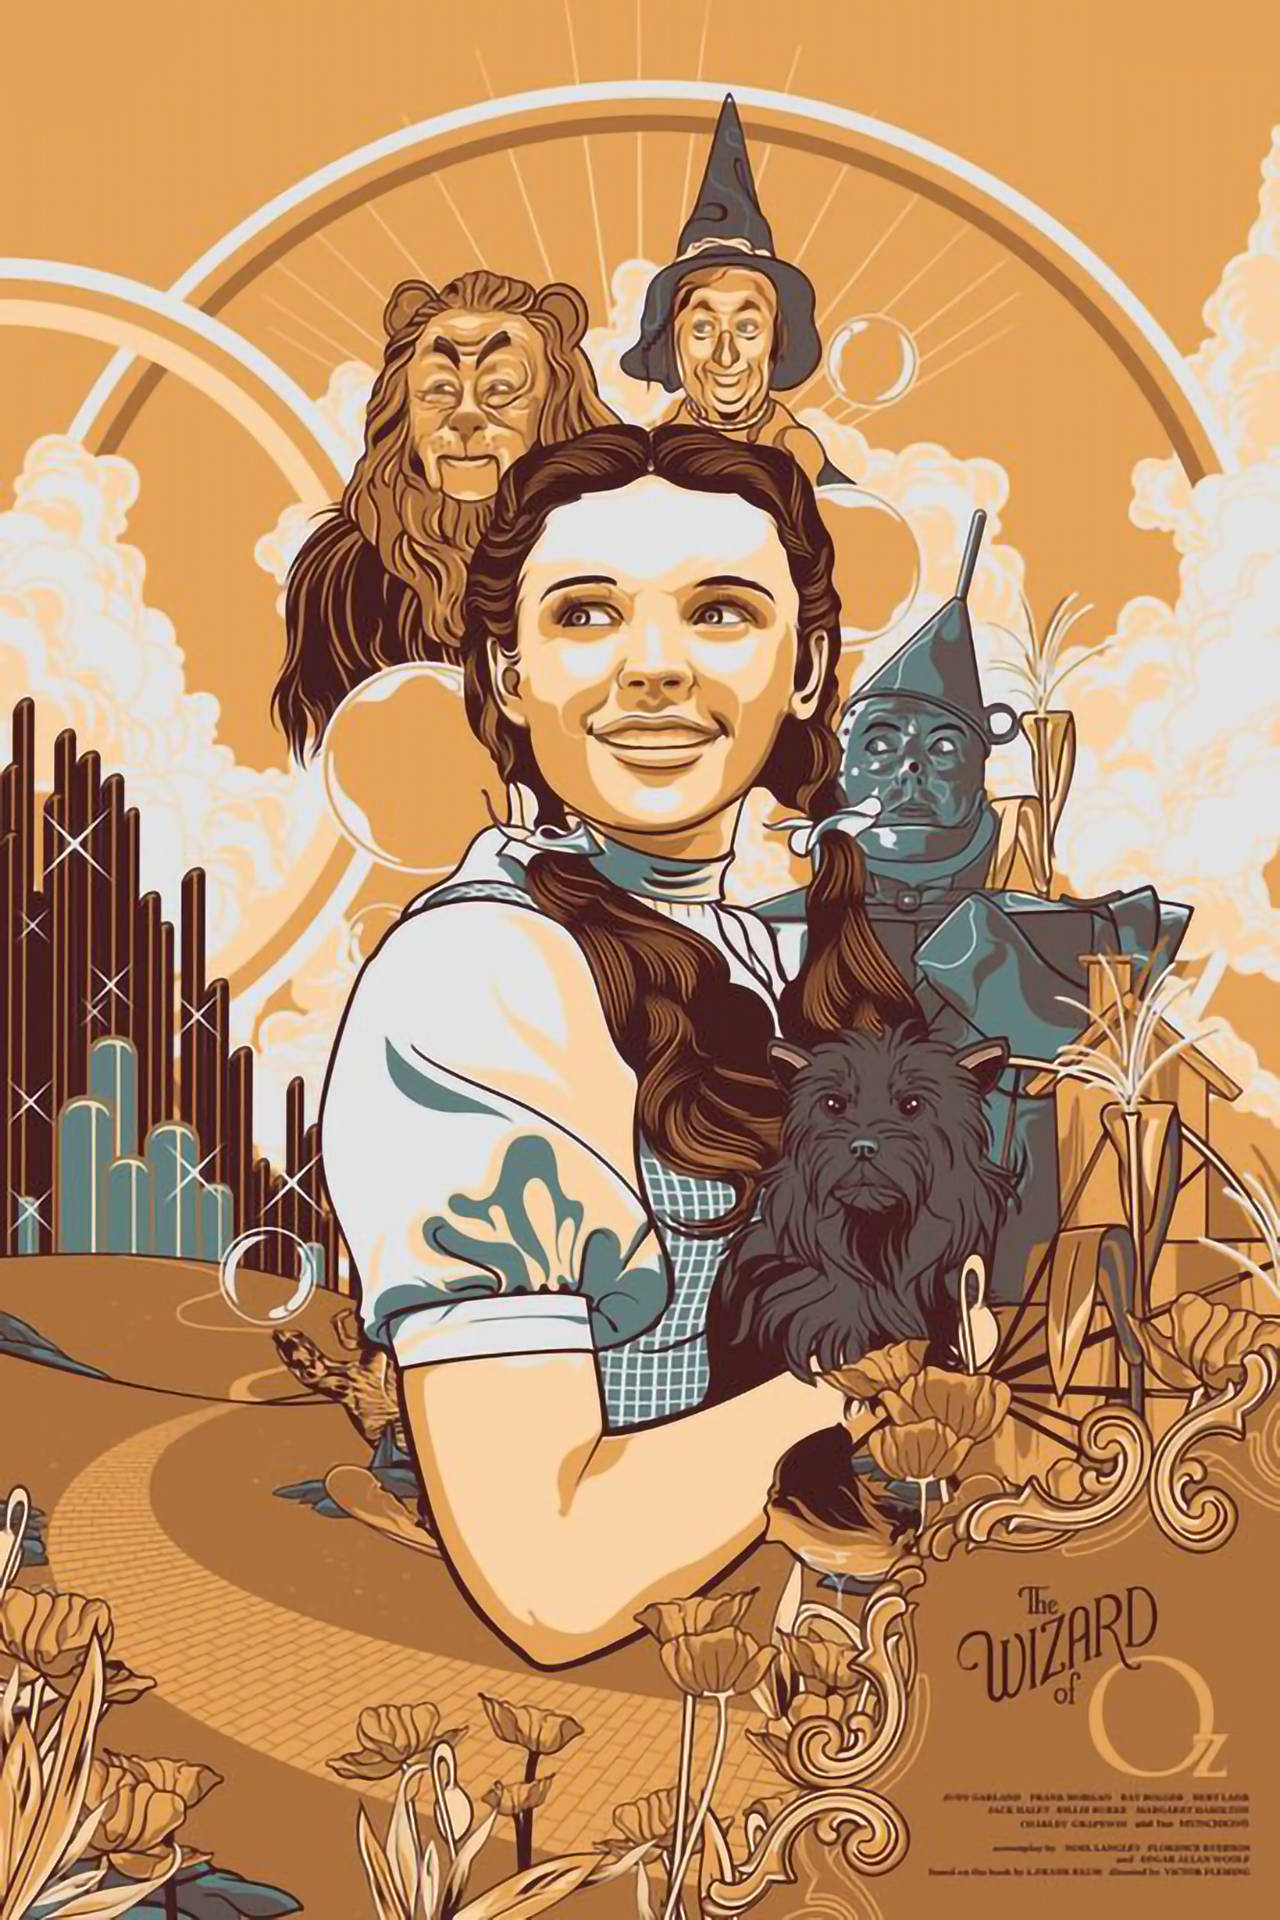 Free The Wizard Of Oz Wallpaper Downloads, The Wizard Of Oz Wallpaper for FREE